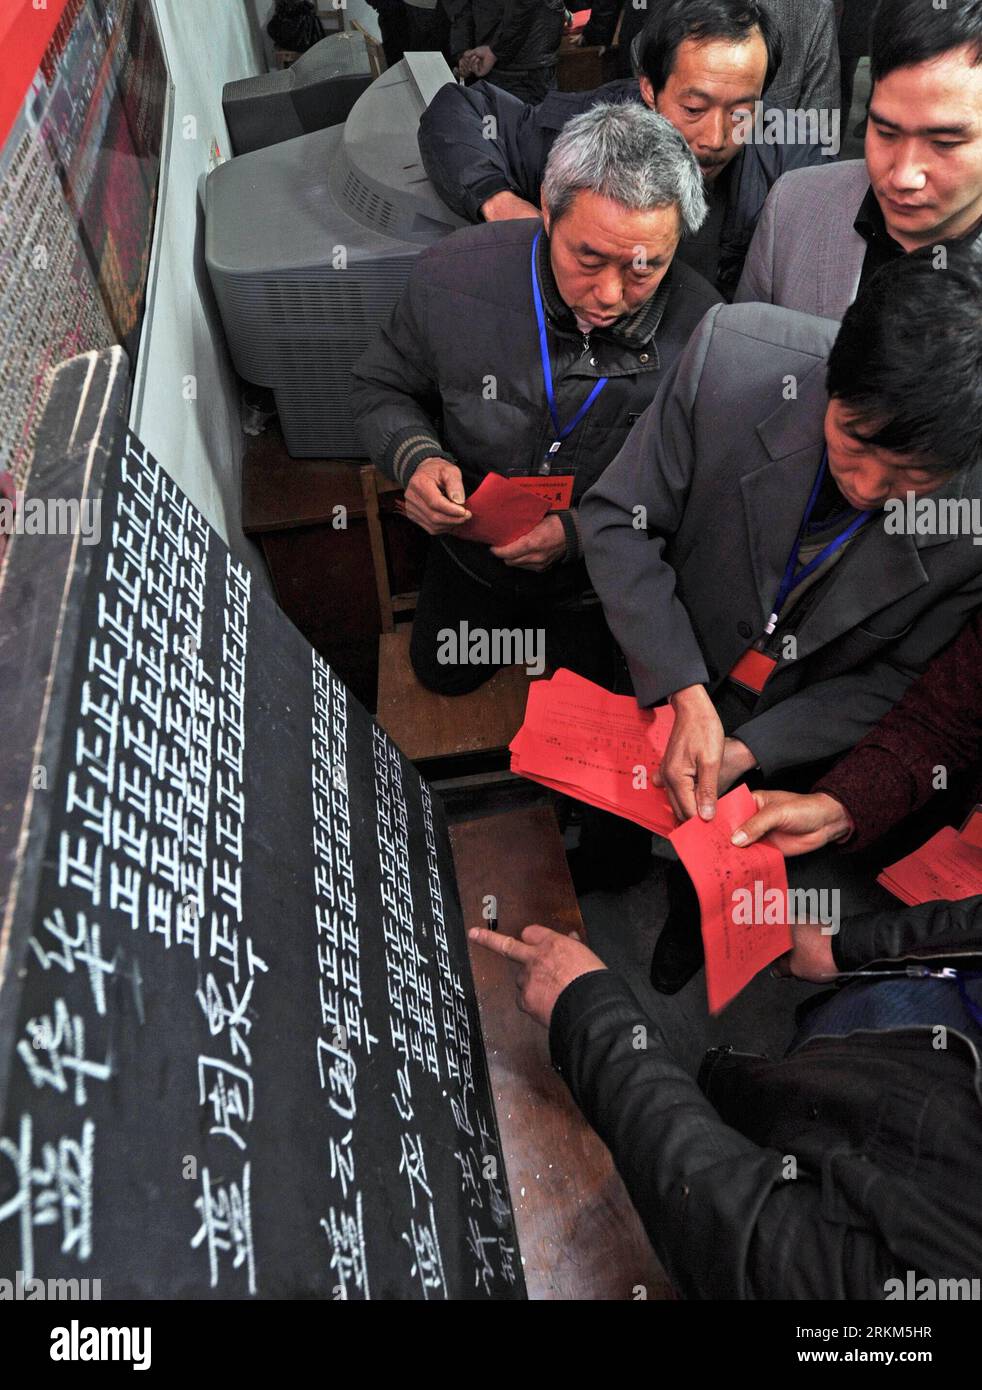 Bildnummer: 56524623  Datum: 15.03.2011  Copyright: imago/Xinhua (111128) -- HANGZHOU, Nov. 28, 2011 (Xinhua) -- Staff members count the ballots of villager Xu Hongliang, who recommended himself as a commitee member during the village committee election in Beier village of Hangbu Township, Quzhou, east China s Zhejiang Province, March 15, 2011. Recently, an amendment of the election method in village committees in Zhejiang Province was approved by the 29 session of the standing committee of the 11th people s congress of Zhejiang Province, allowing villagers to recommend themselves to take part Stock Photo